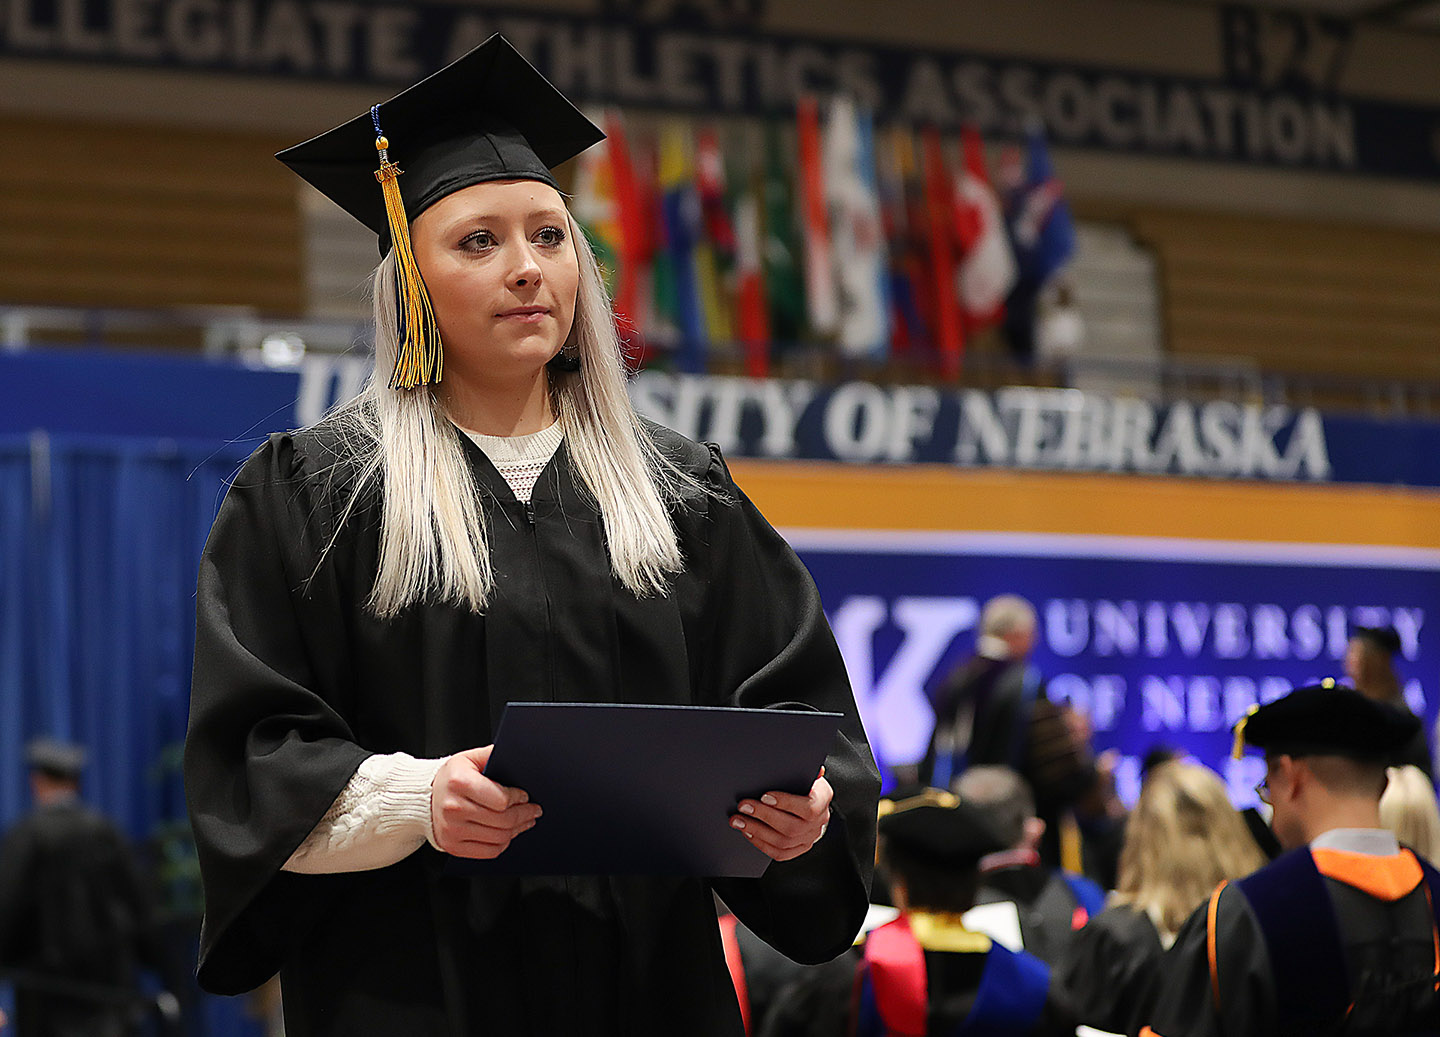 Gracie Bullock graduated Friday with a bachelor’s degree in social work from UNK. It was her first time on the UNK campus.